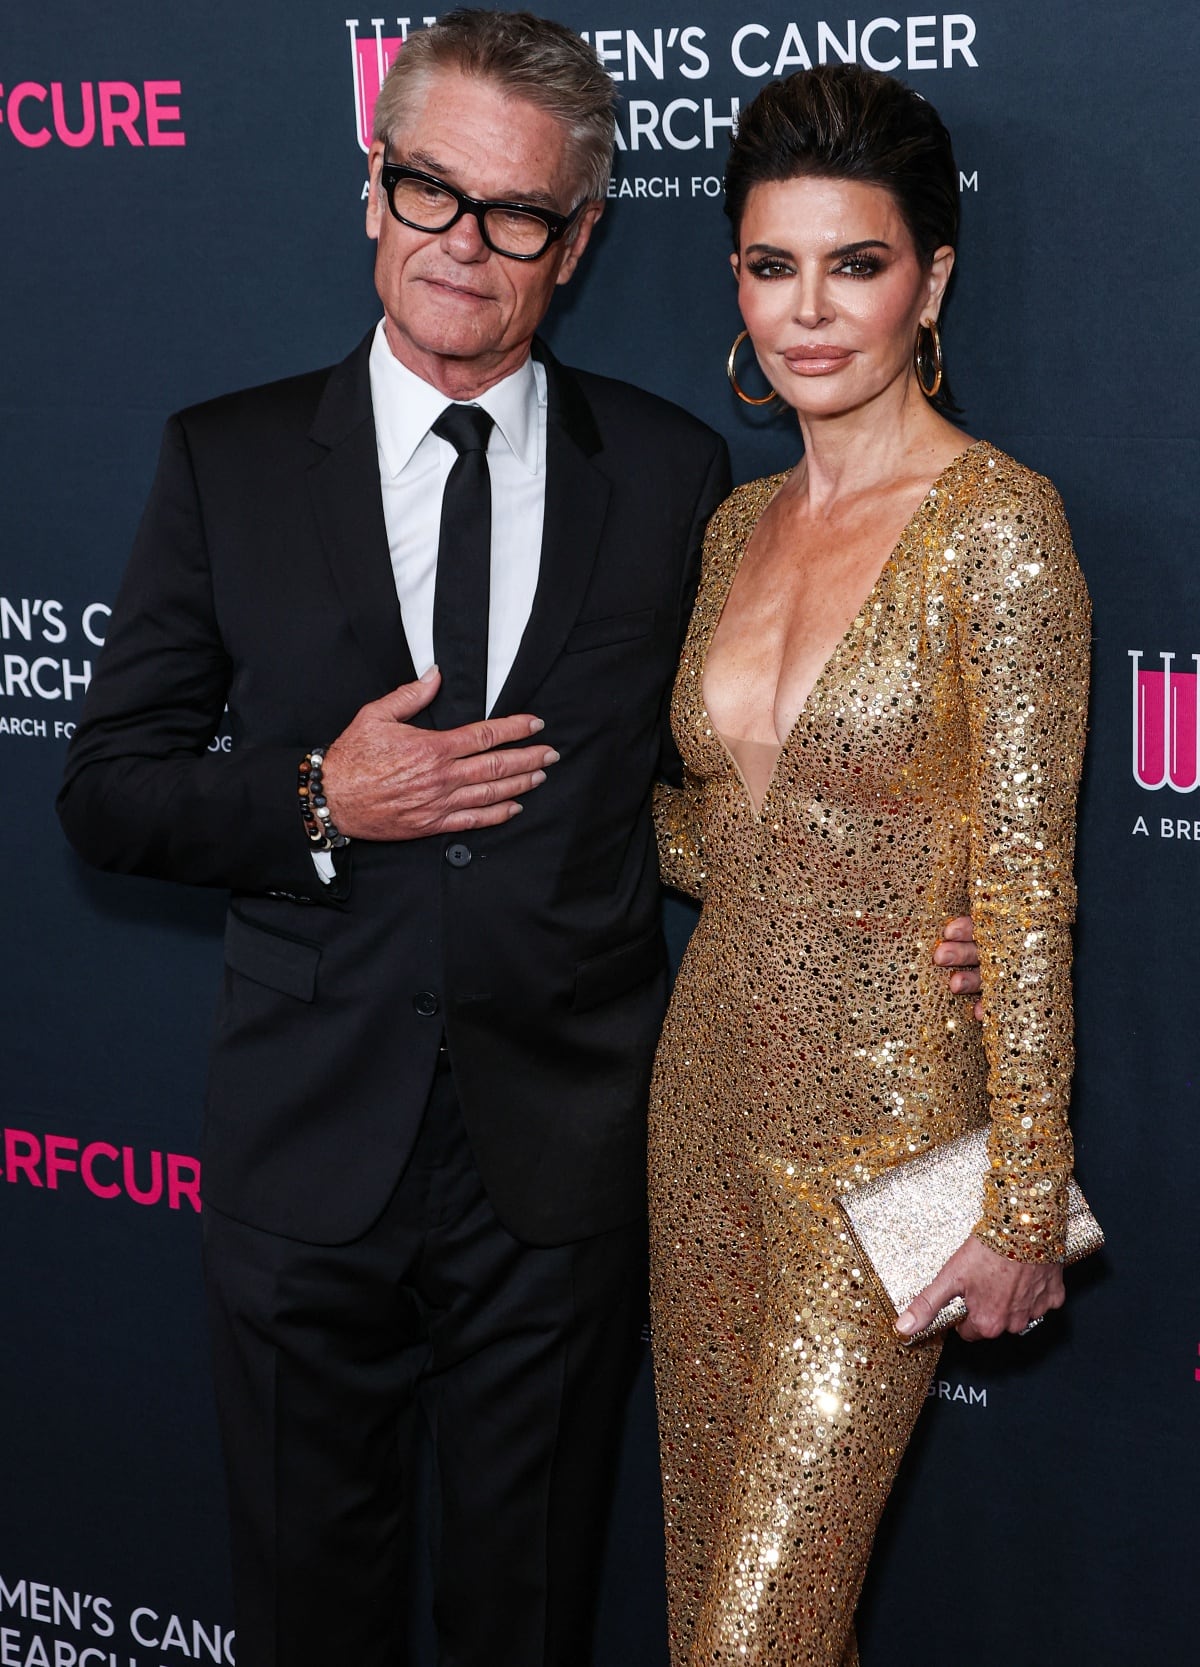 Harry Hamlin kept close to his wife at the event, wrapping his arm around Lisa Rinna’s waist as they posed for photographs together